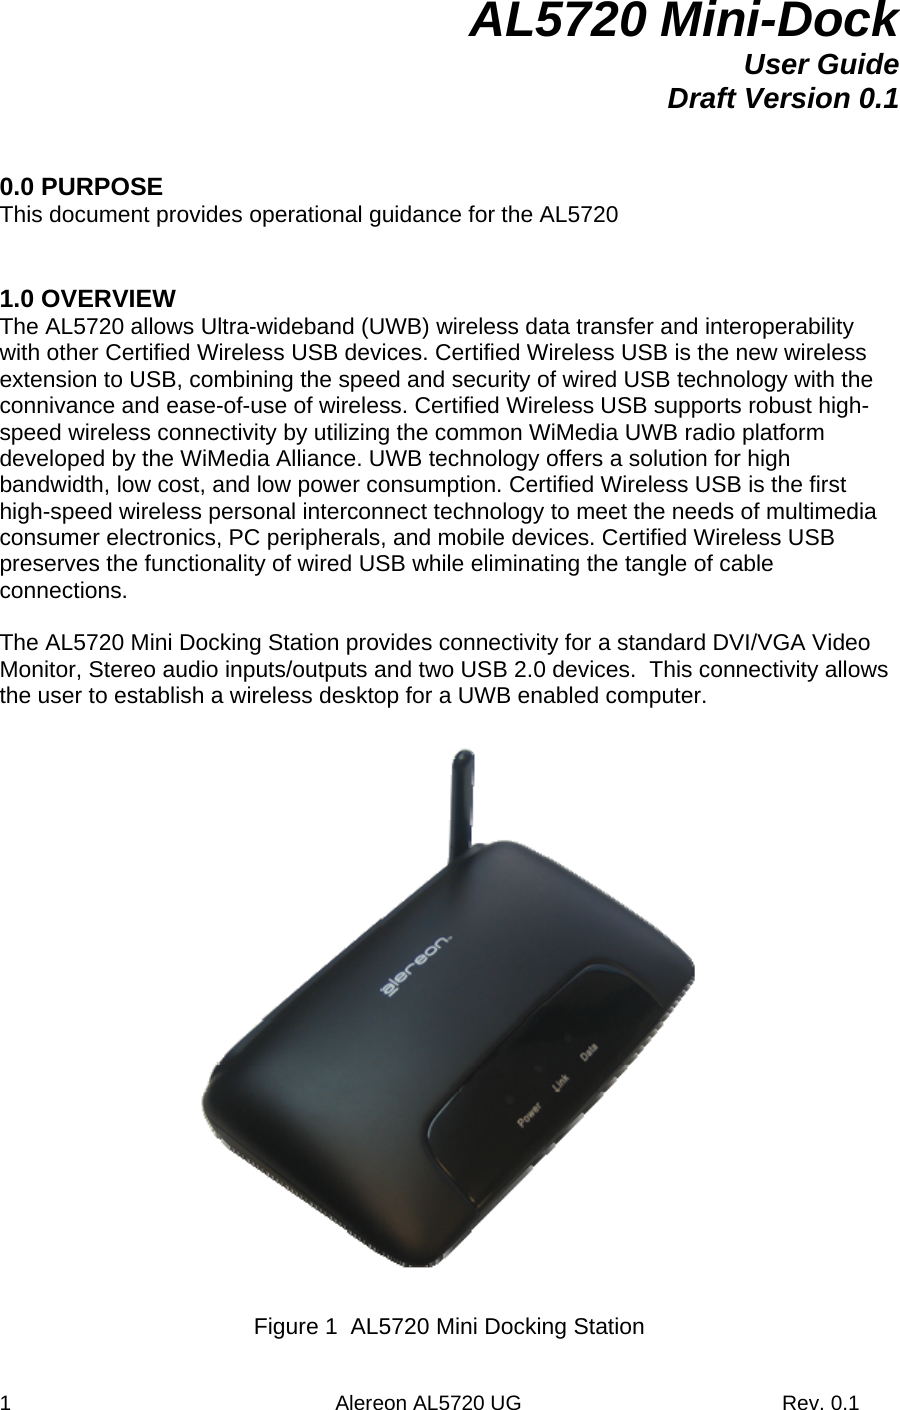 1                                                        Alereon AL5720 UG                                             Rev. 0.1 AL5720 Mini-Dock User Guide Draft Version 0.1   0.0 PURPOSE This document provides operational guidance for the AL5720   1.0 OVERVIEW The AL5720 allows Ultra-wideband (UWB) wireless data transfer and interoperability with other Certified Wireless USB devices. Certified Wireless USB is the new wireless extension to USB, combining the speed and security of wired USB technology with the connivance and ease-of-use of wireless. Certified Wireless USB supports robust high-speed wireless connectivity by utilizing the common WiMedia UWB radio platform developed by the WiMedia Alliance. UWB technology offers a solution for high bandwidth, low cost, and low power consumption. Certified Wireless USB is the first high-speed wireless personal interconnect technology to meet the needs of multimedia consumer electronics, PC peripherals, and mobile devices. Certified Wireless USB preserves the functionality of wired USB while eliminating the tangle of cable connections.  The AL5720 Mini Docking Station provides connectivity for a standard DVI/VGA Video Monitor, Stereo audio inputs/outputs and two USB 2.0 devices.  This connectivity allows the user to establish a wireless desktop for a UWB enabled computer.    Figure 1  AL5720 Mini Docking Station 